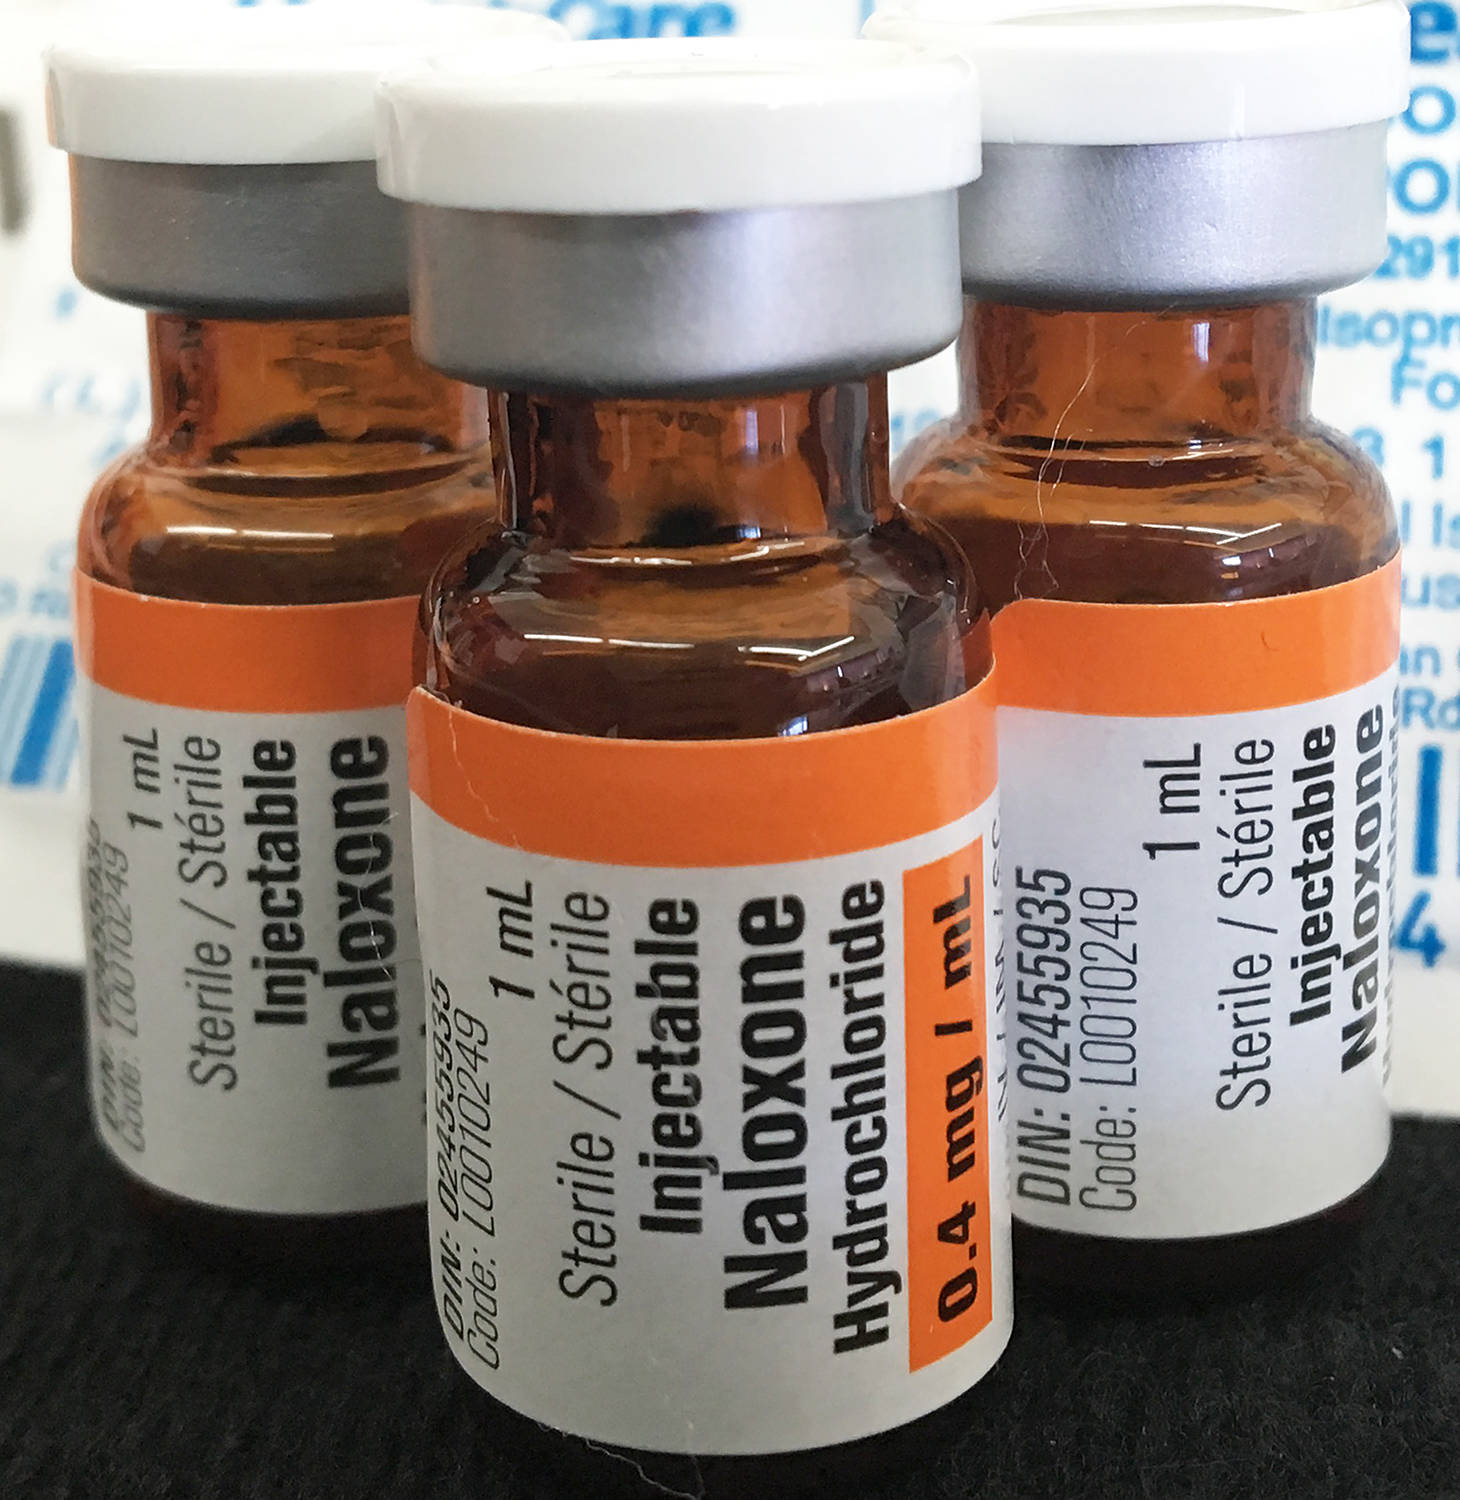 AHS has opened access to the opioid blocker Naloxone kits in an effort to deal with the opioid crisis in Alberta. Individuals can, in addition to pharmacies, go into a local hospital and request the kit with no questions asked and no cost. Photo by Jeffrey Heyden-Kaye